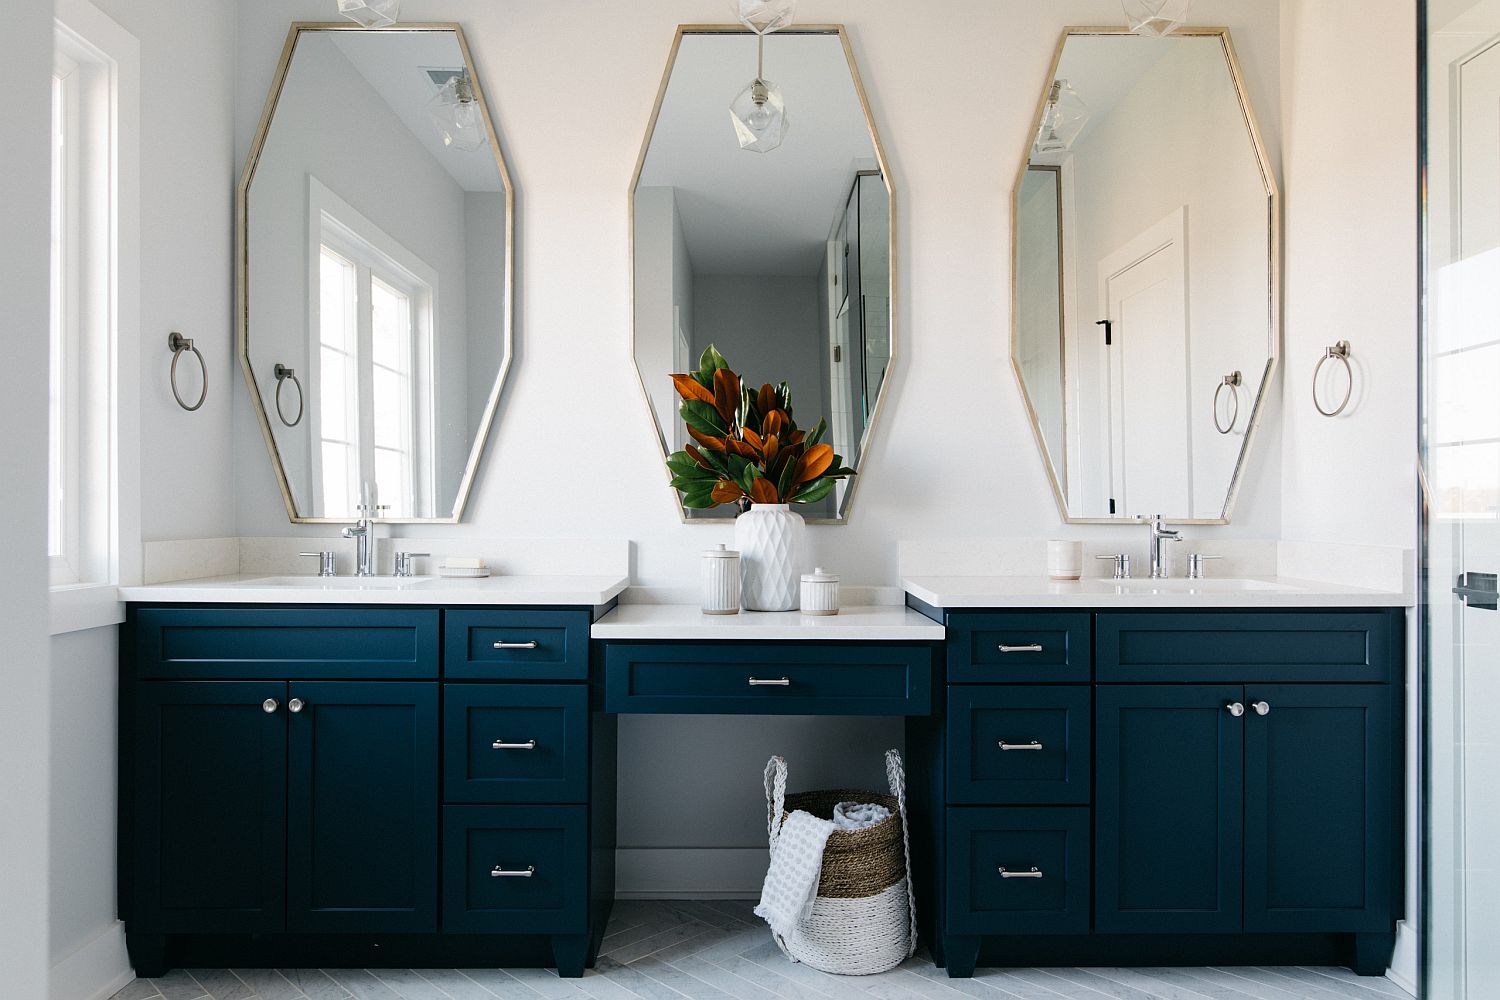 A tinge of green coupled with blue for the expansive bathroom vanity in the modern farmhouse setting